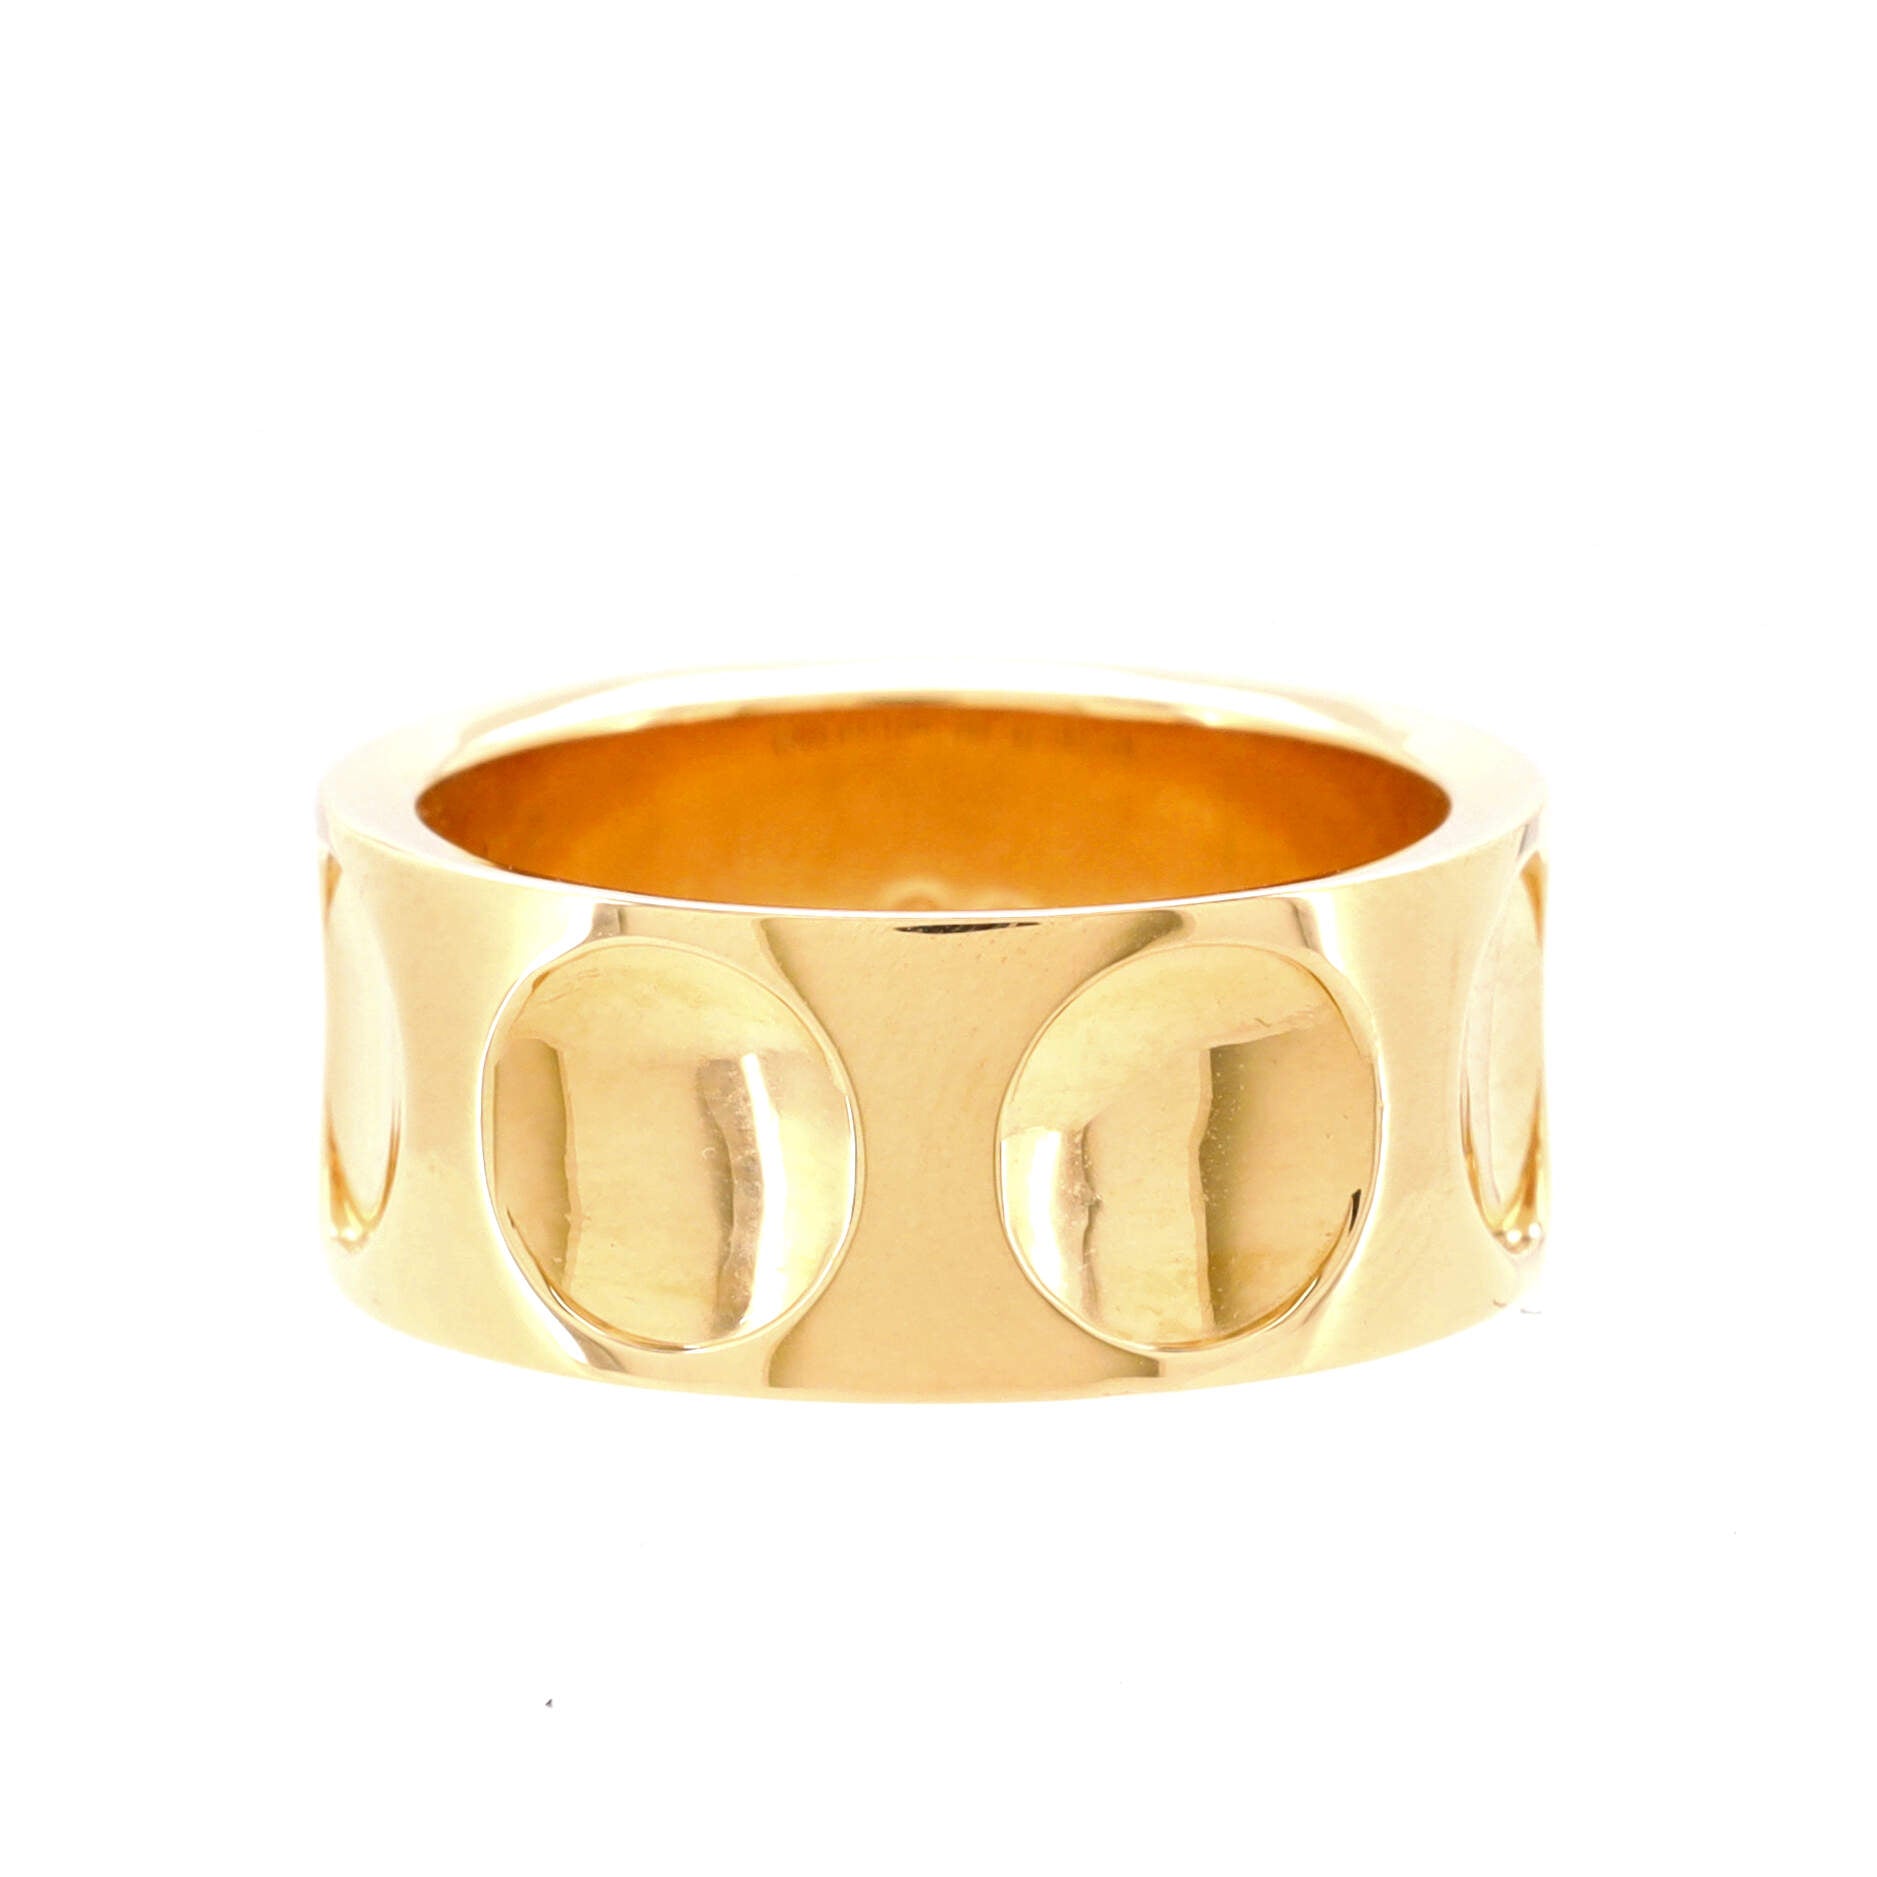 Louis Vuitton LV Volt Upside Down Ring, Yellow Gold Gold. Size 58